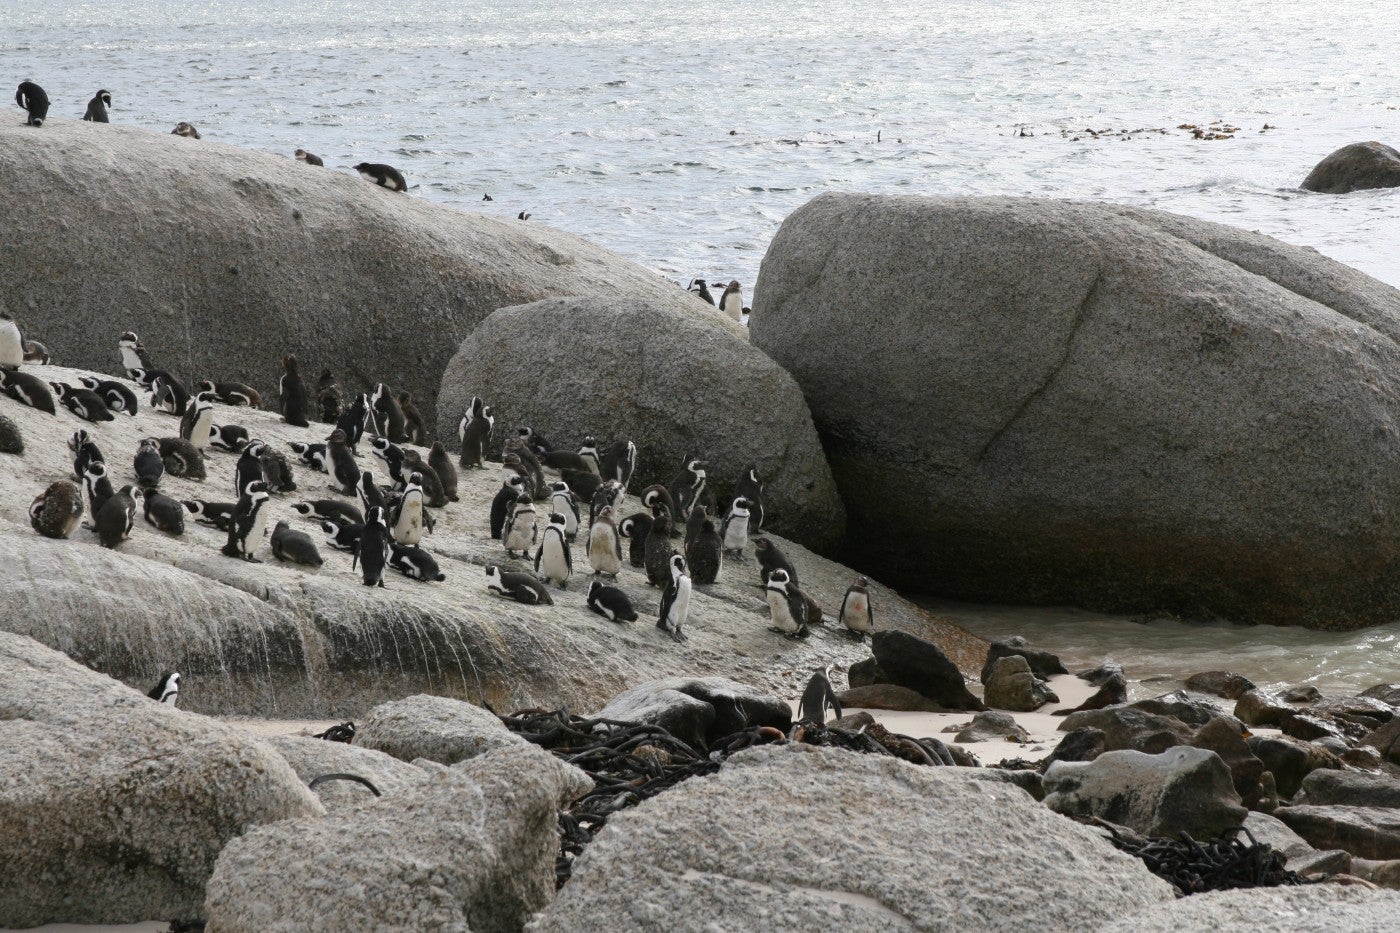 A colony of African penguins gather on the shore in South Africa in 2014